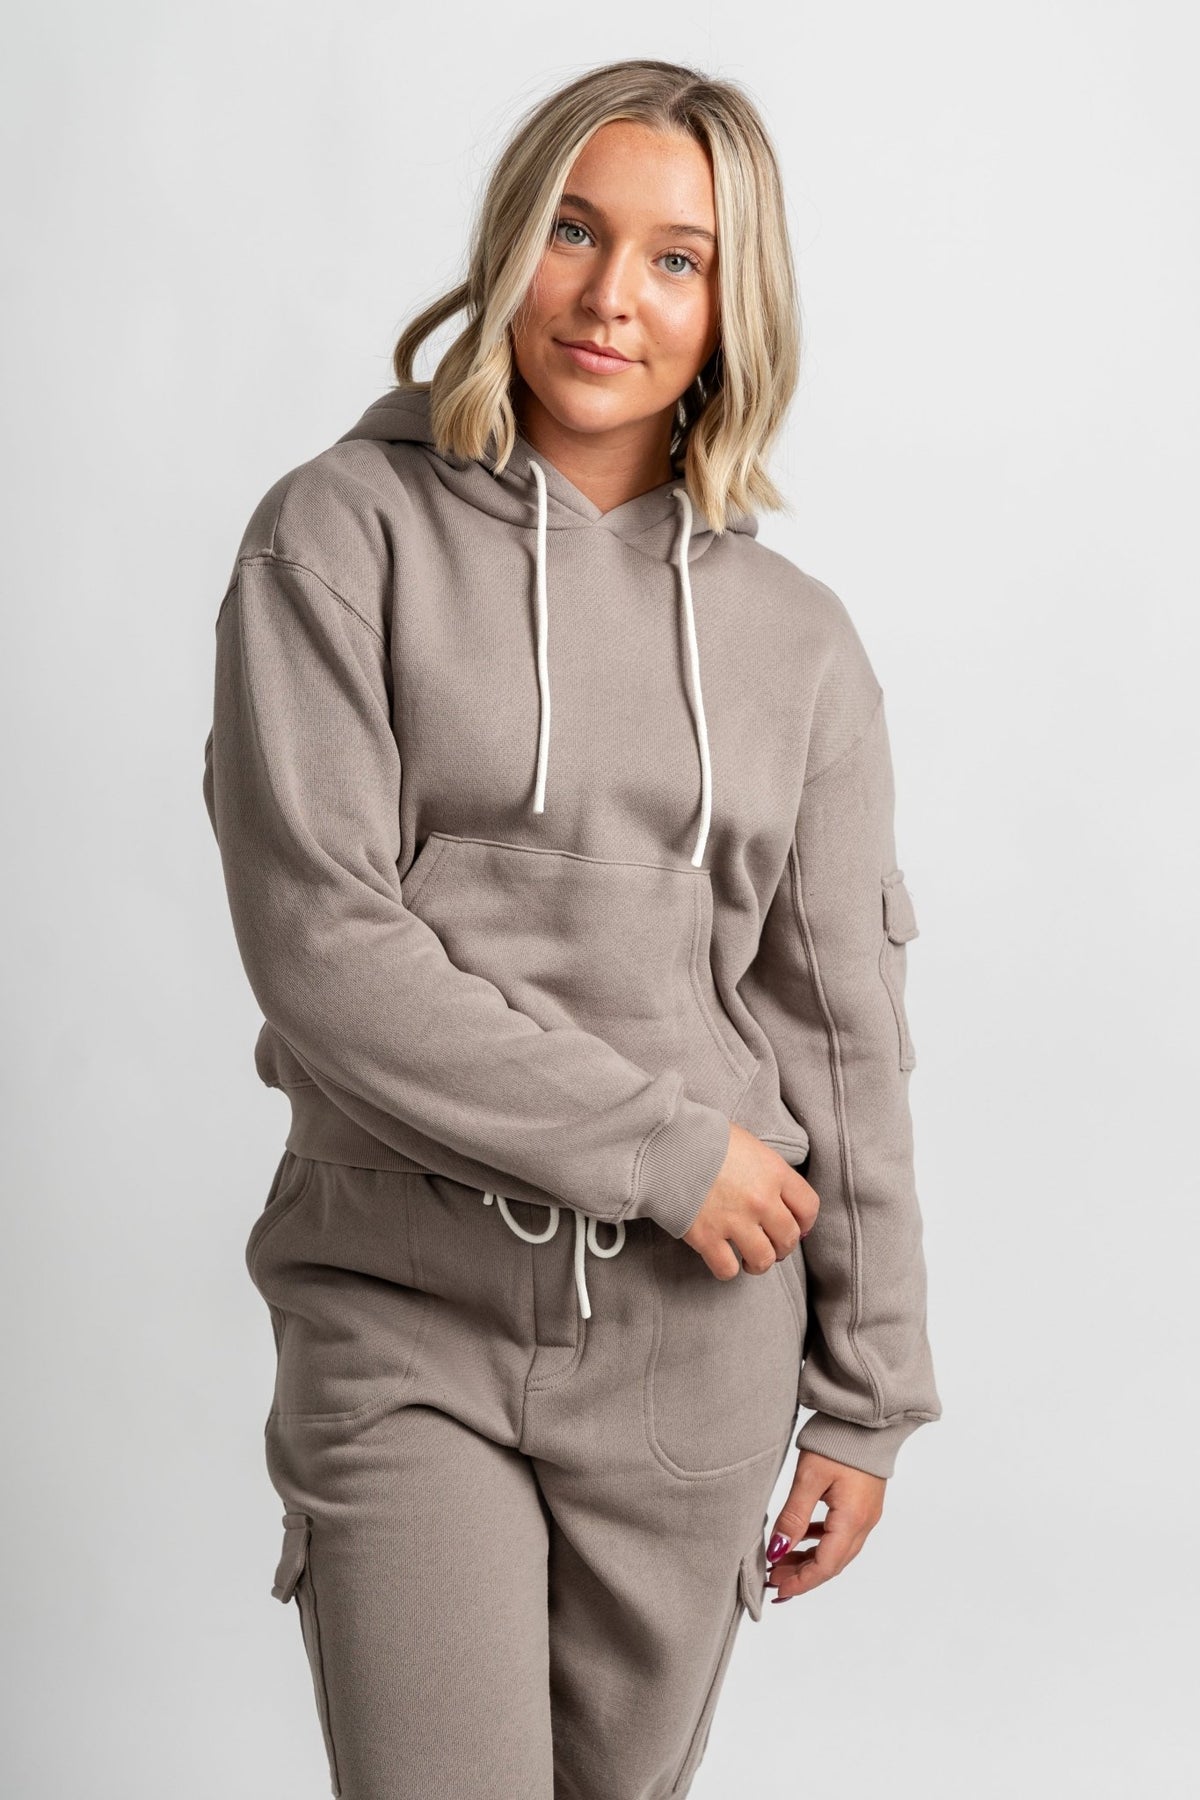 Z Supply cargo hoodie lunar grey - Z Supply sweatshirt - Z Supply Tops, Dresses, Tanks, Tees, Cardigans, Joggers and Loungewear at Lush Fashion Lounge